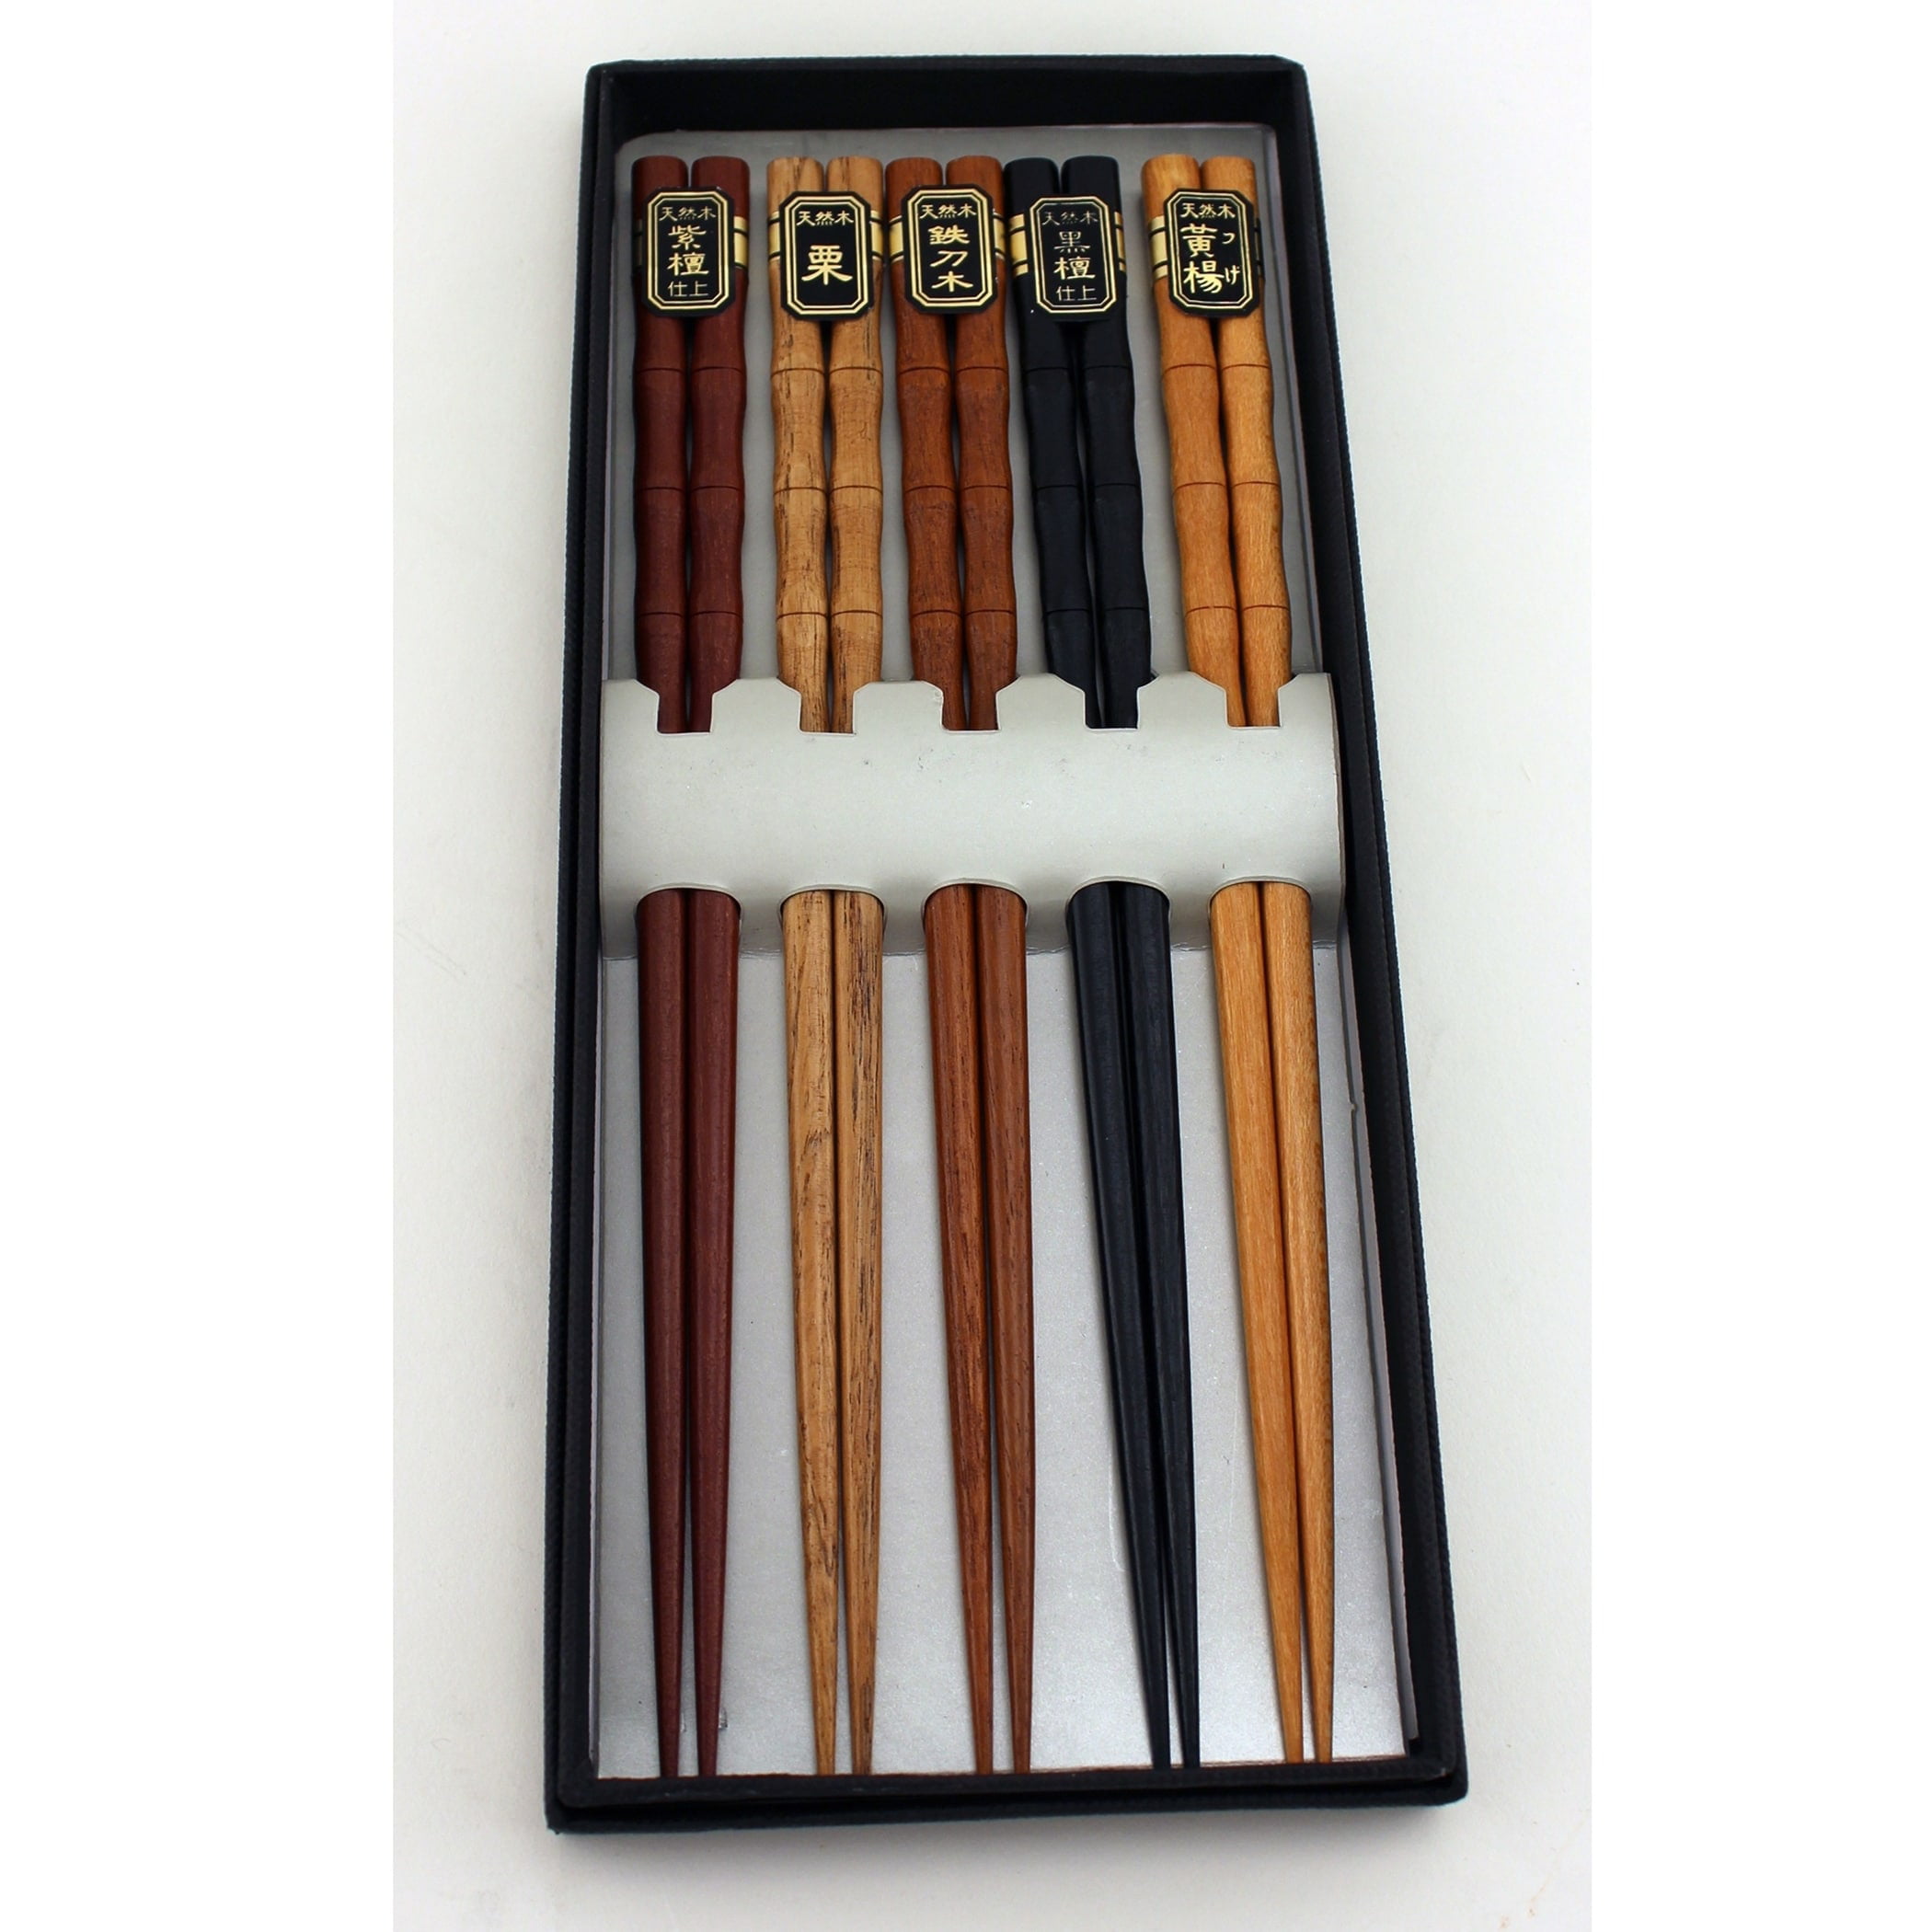 KAFUH CHOPSTICKS WOODEN FLOWERS AND FANS SET OF 5 ..New in Box